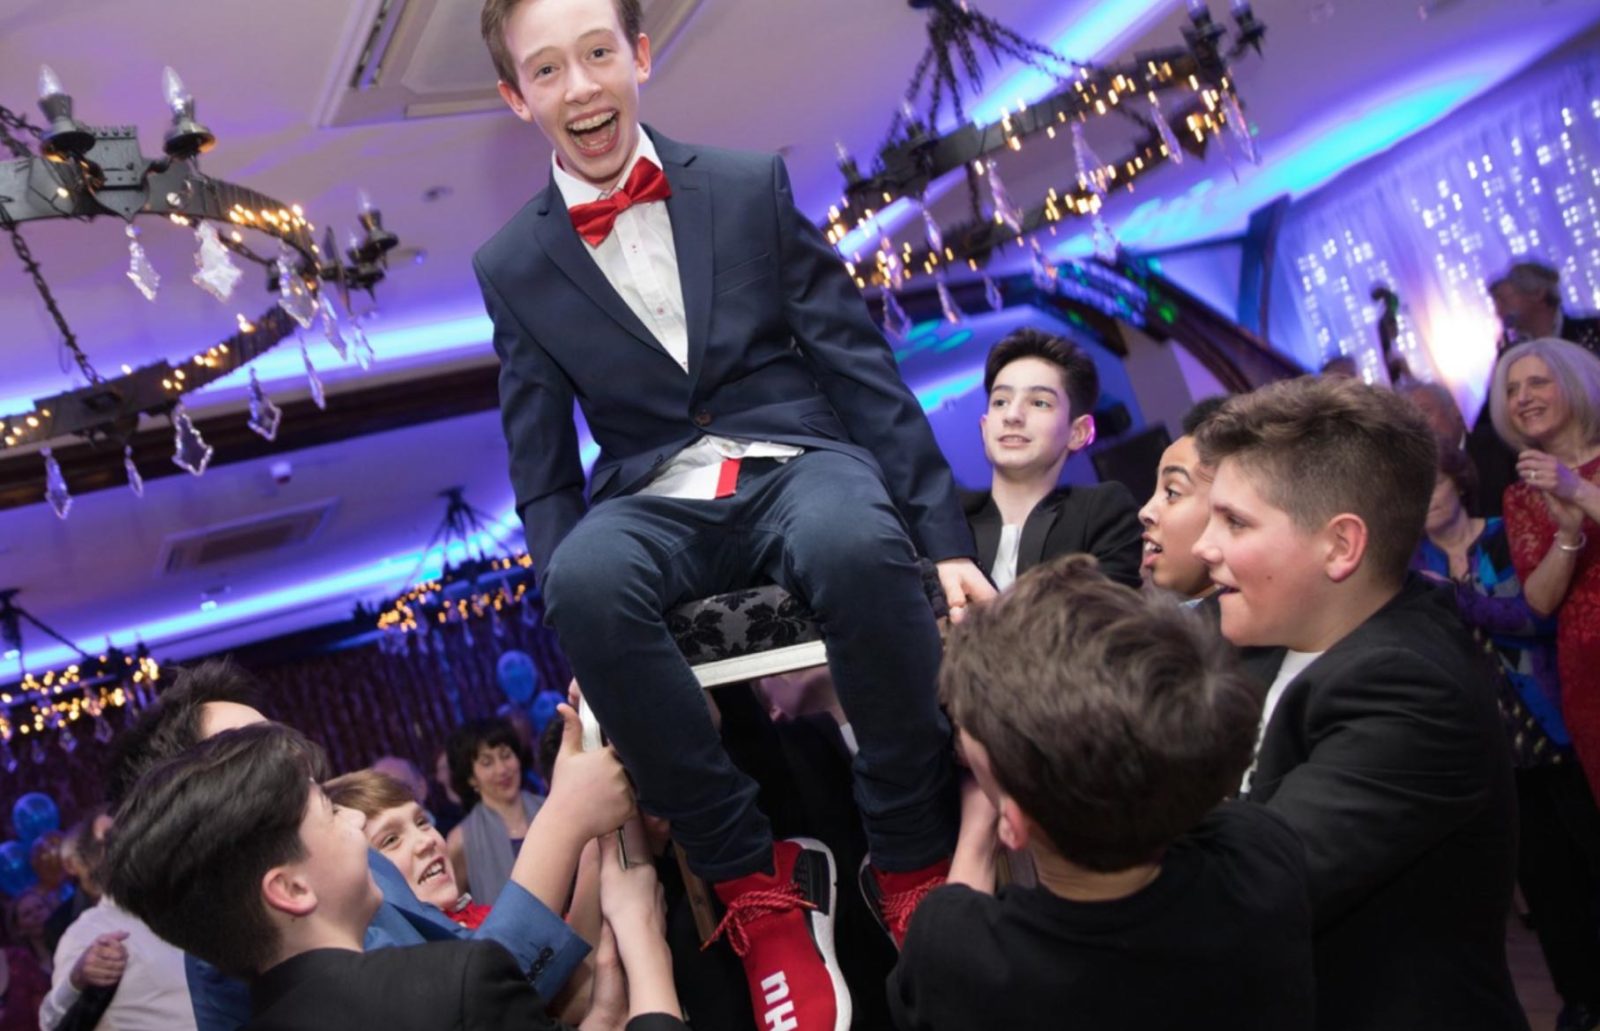 Image of a Bar mitzvah boy being balanced high above on a chair